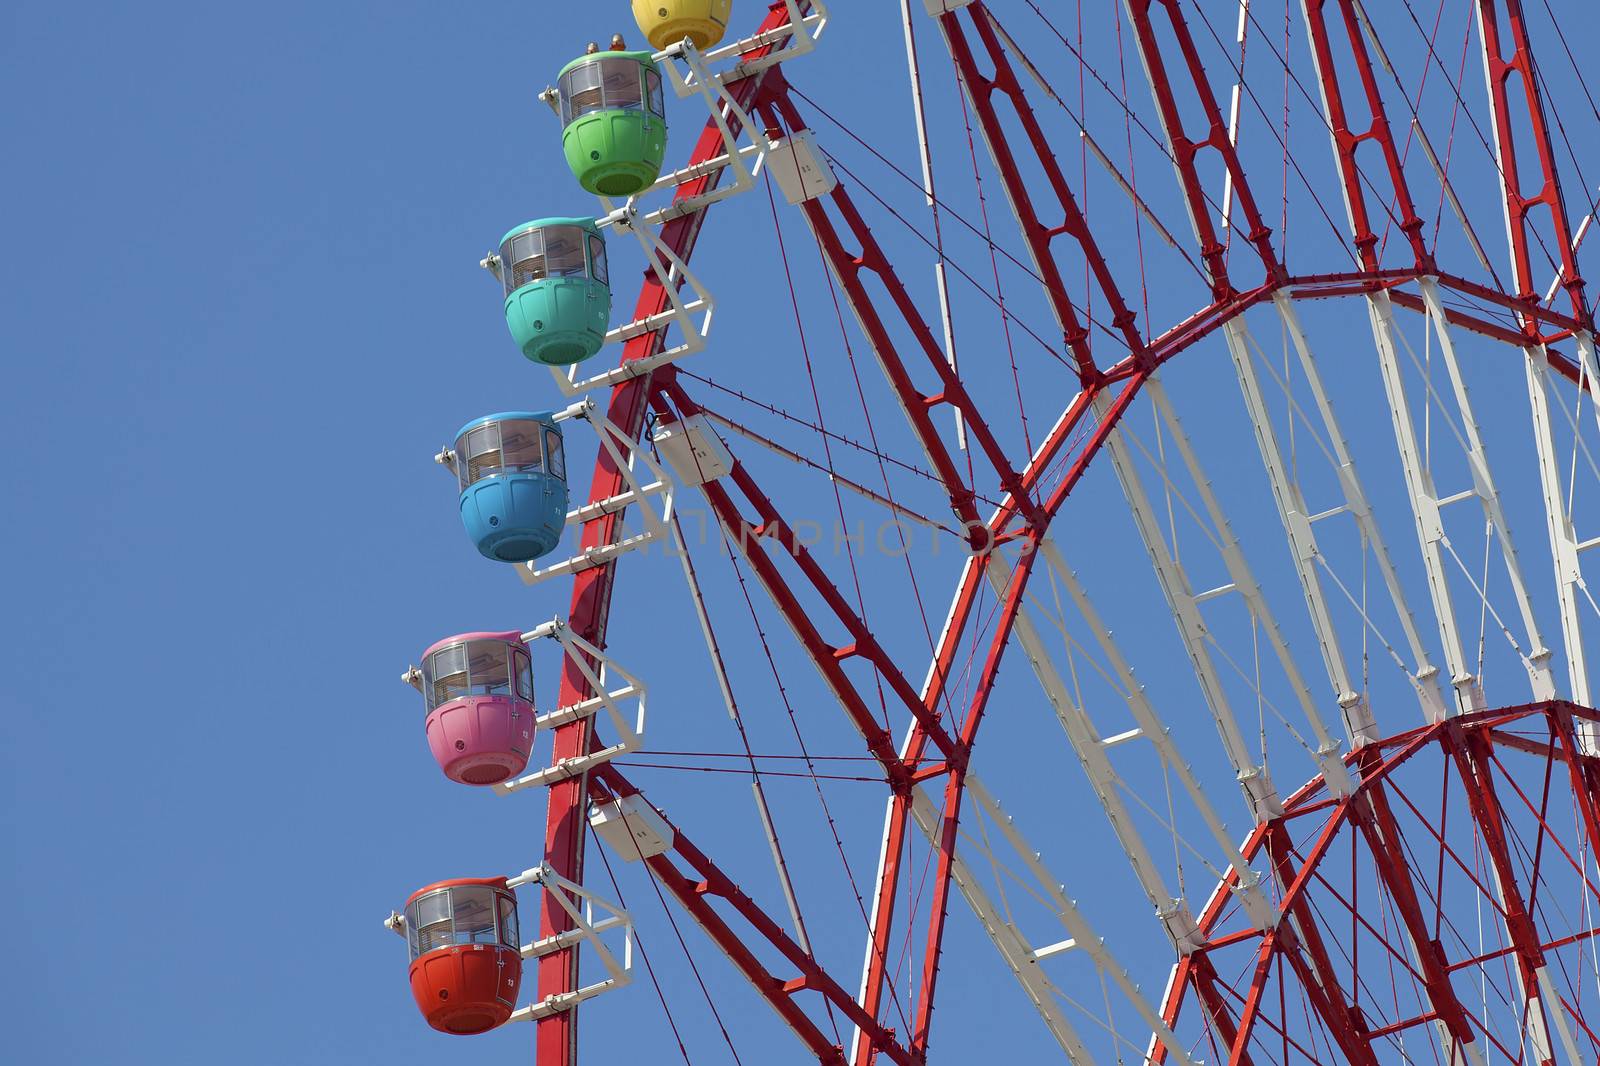 Close up of the colorful Ferris Wheel in Tokyo